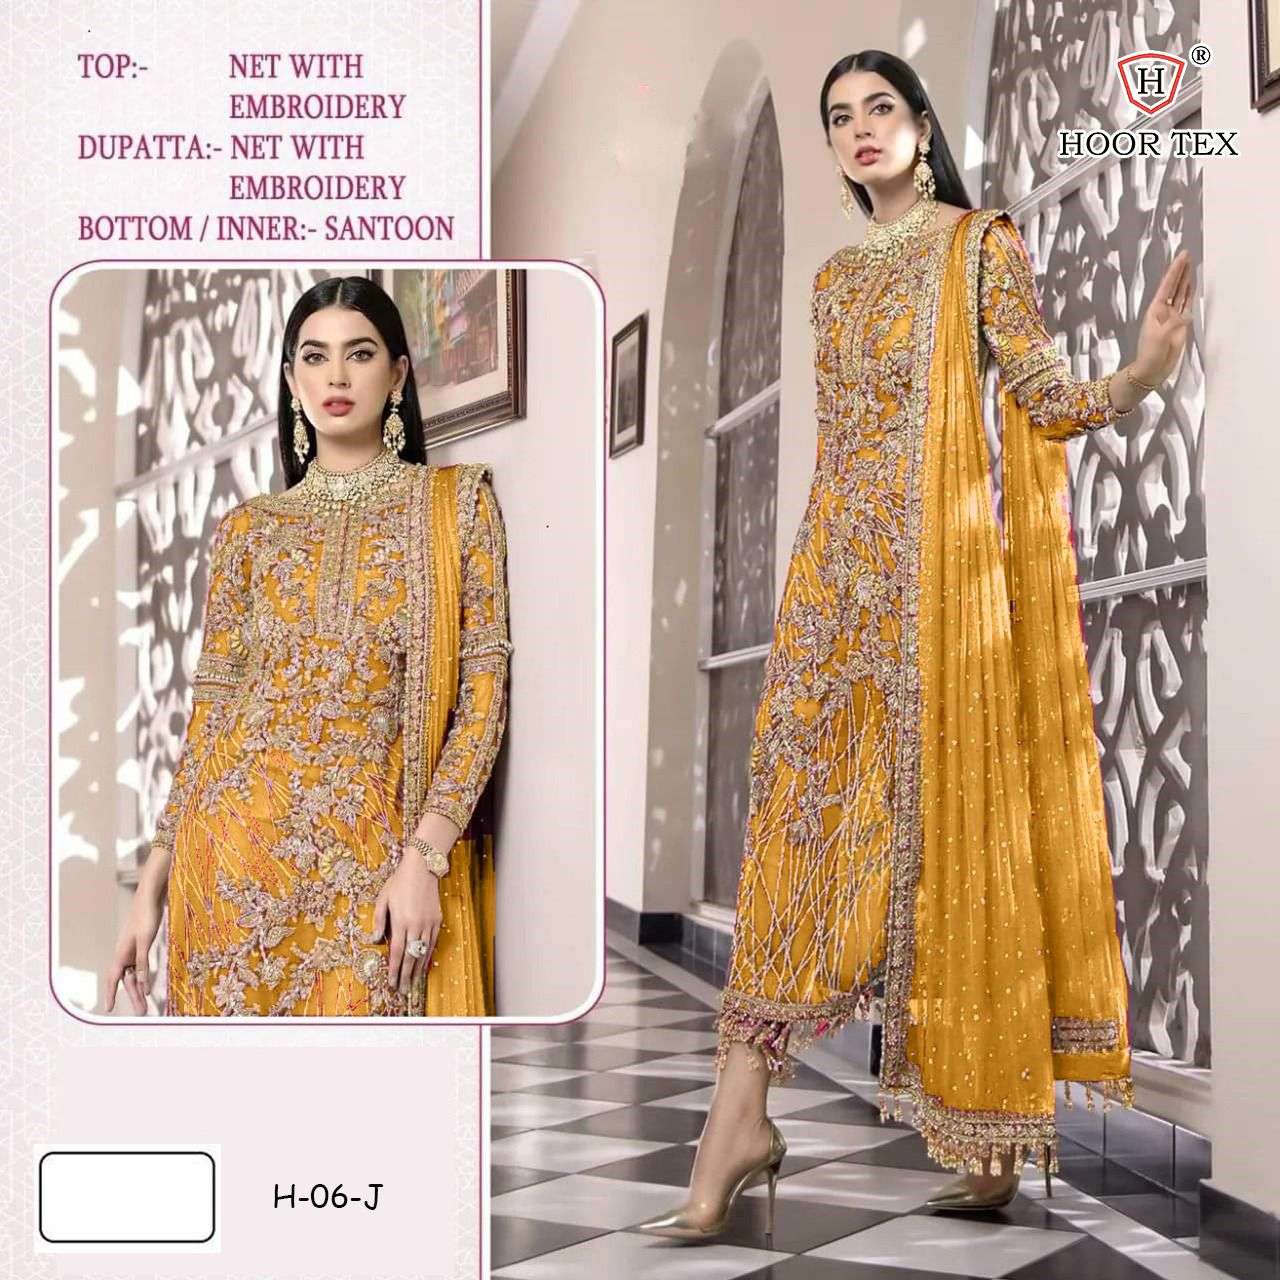 Hoor tex 06 Net With Embroidery Sequence Work Pakistani Salw...